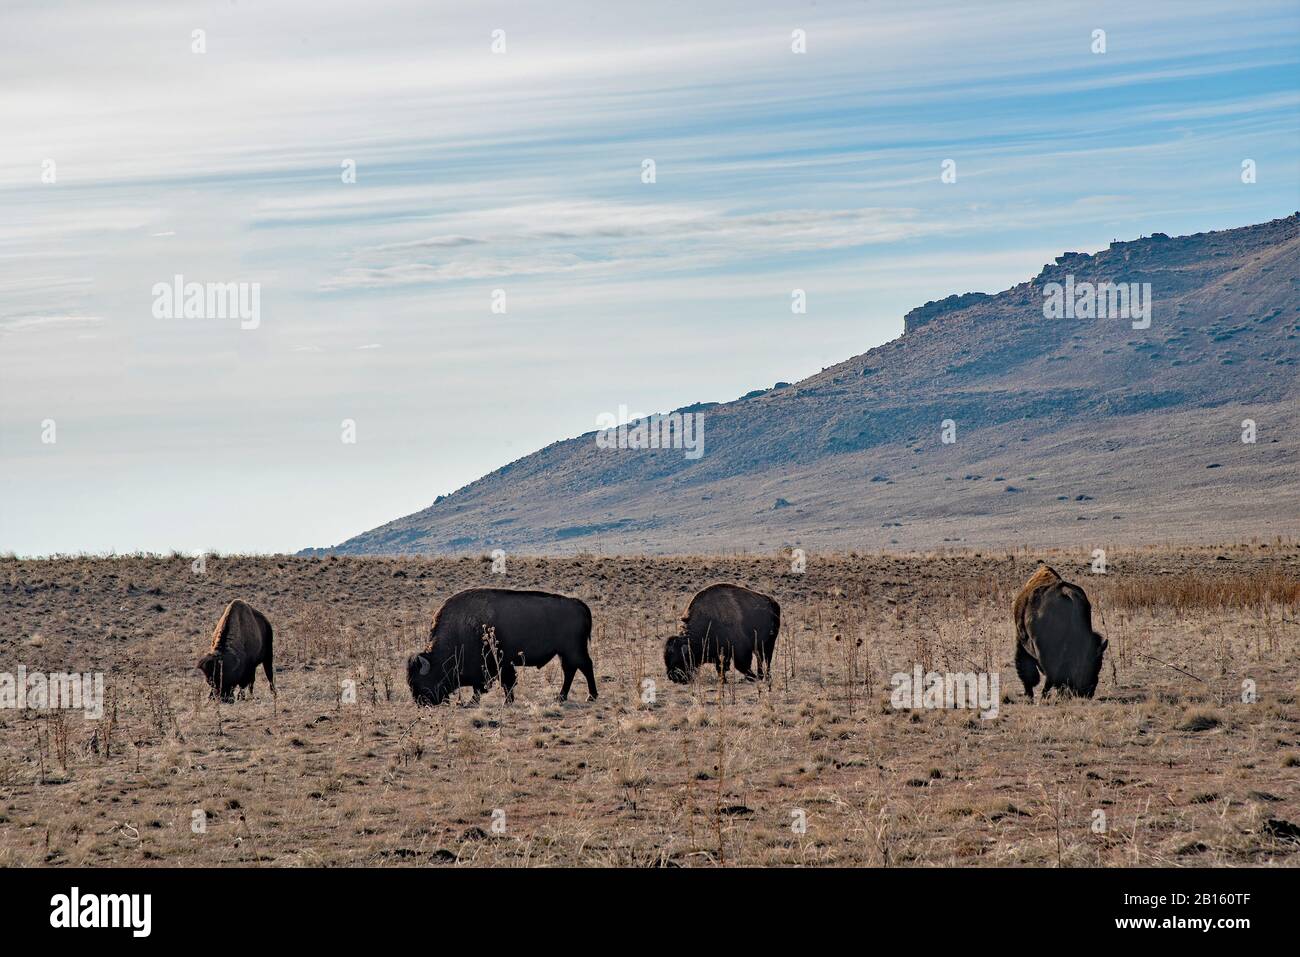 American Bison grazing on Antelope Island, Utah, USA.  This is a purebred her.  Most bison are bred with domestic, cattle called beefalo. Stock Photo